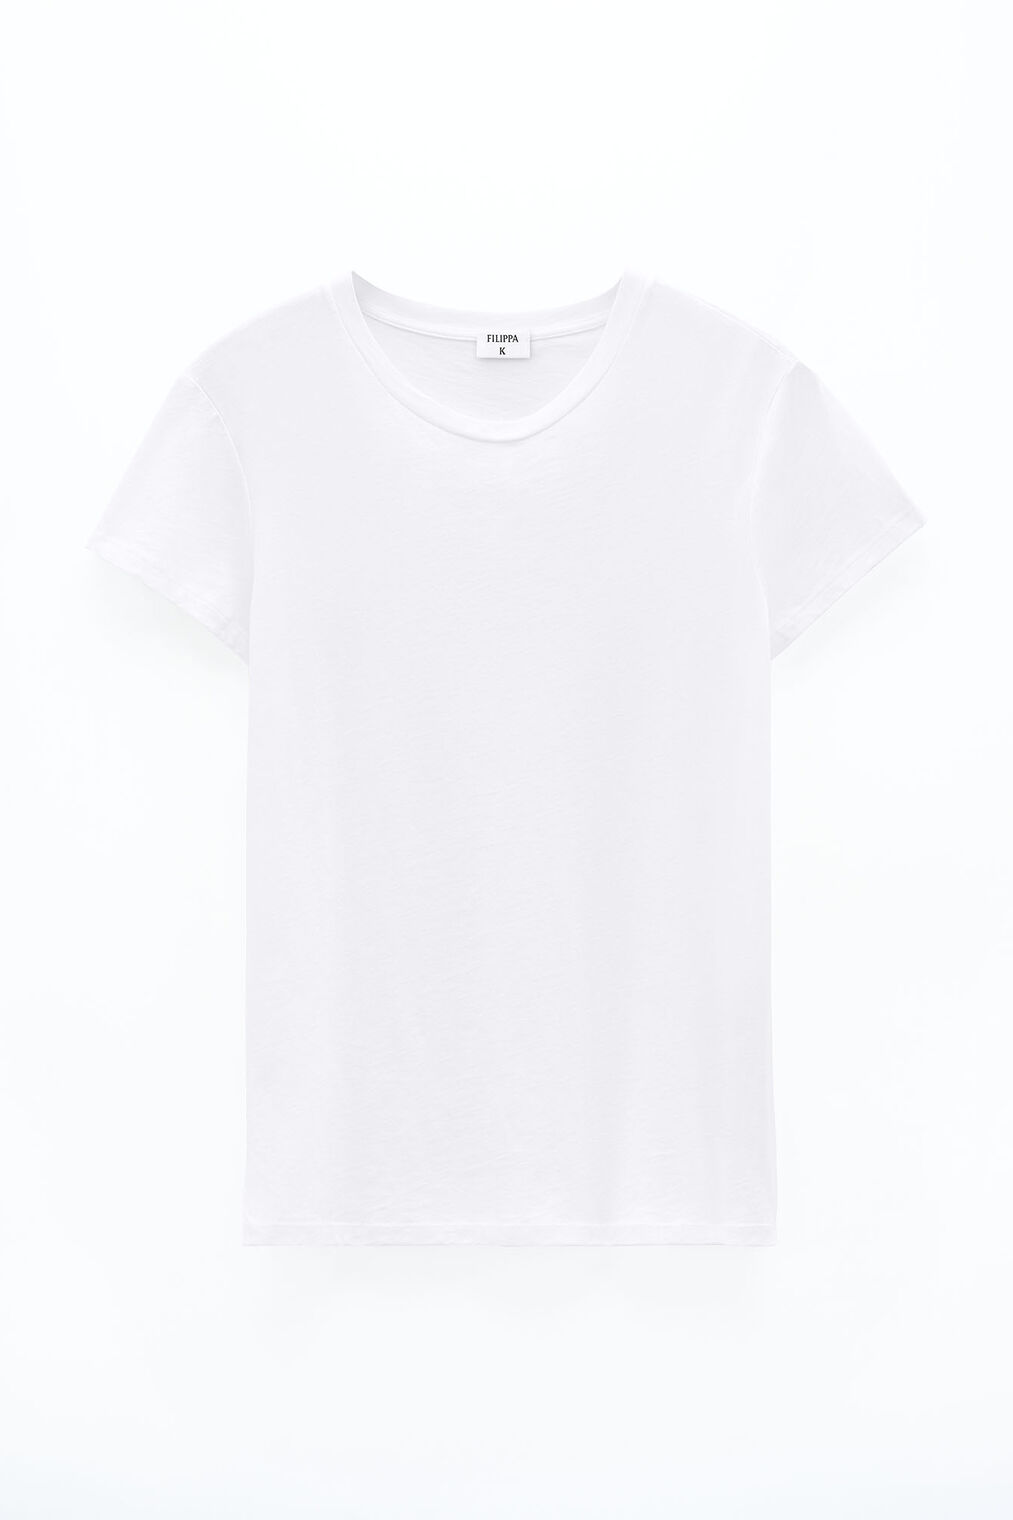 Soft cotton tee in white